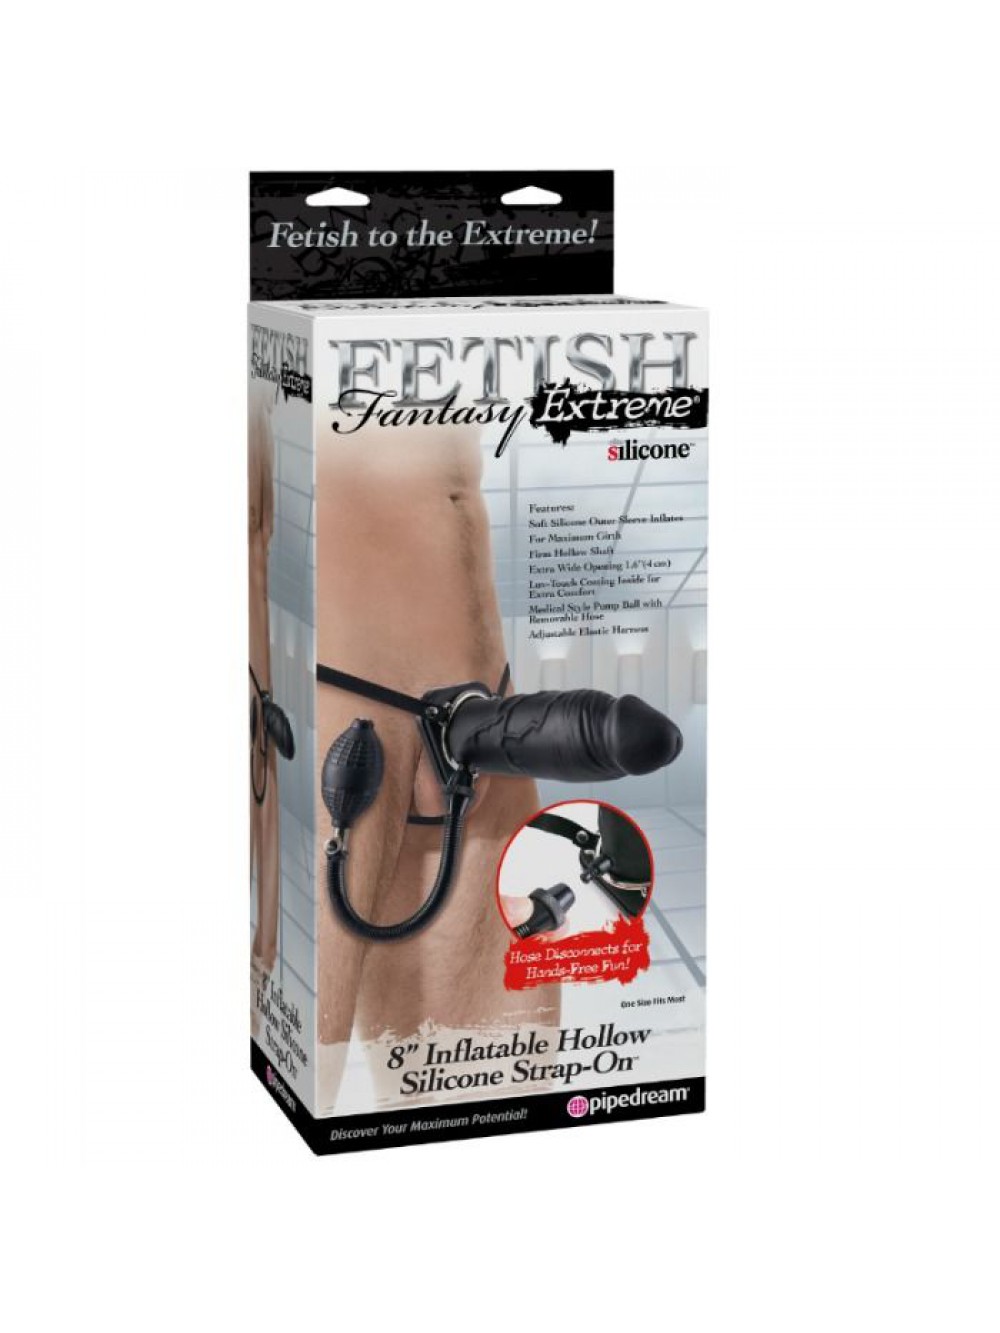 FETISH FANTASY EXTREME 8" INFLATABLE HOLLOW SILICONE STRAP-ON 603912363951